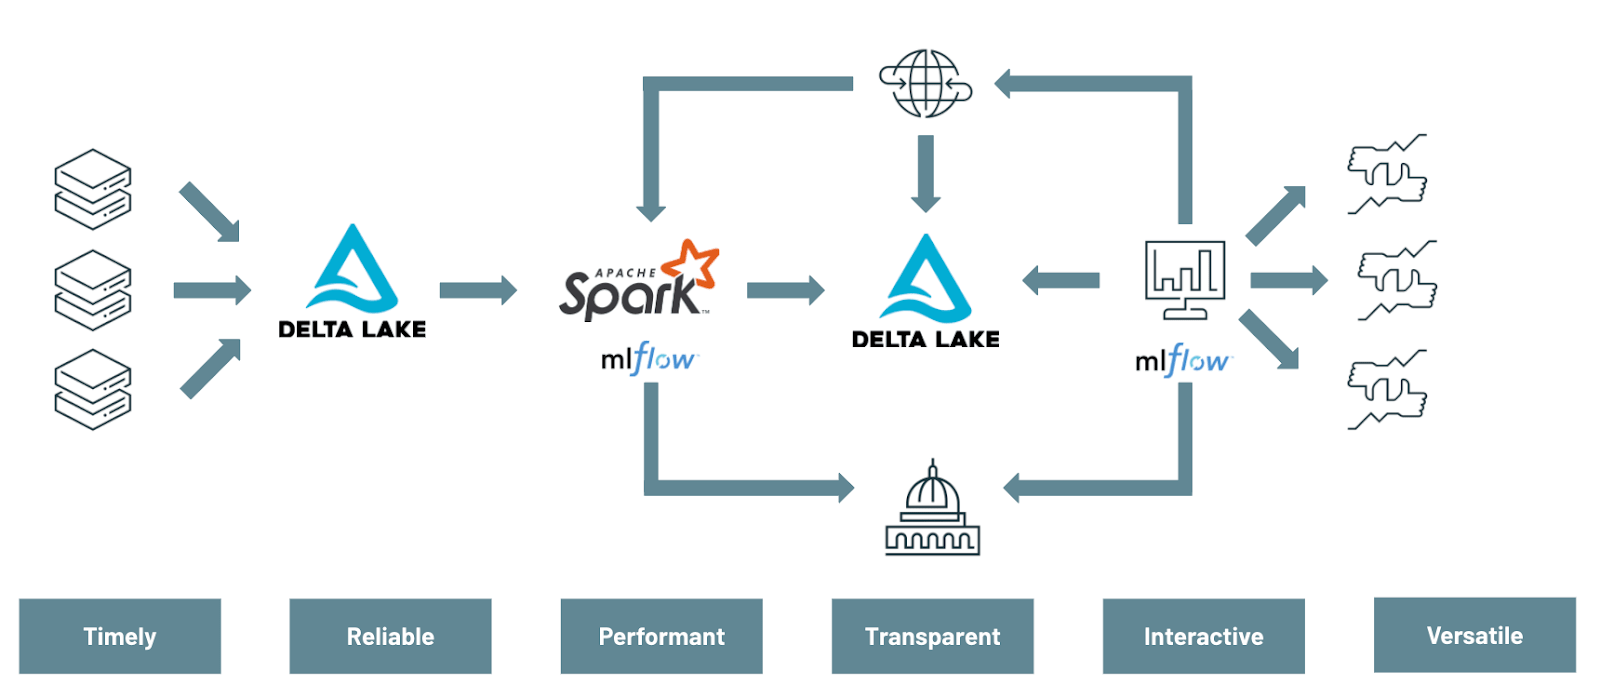 The Databricks architecture used to modernize traditional VaR Calculations.